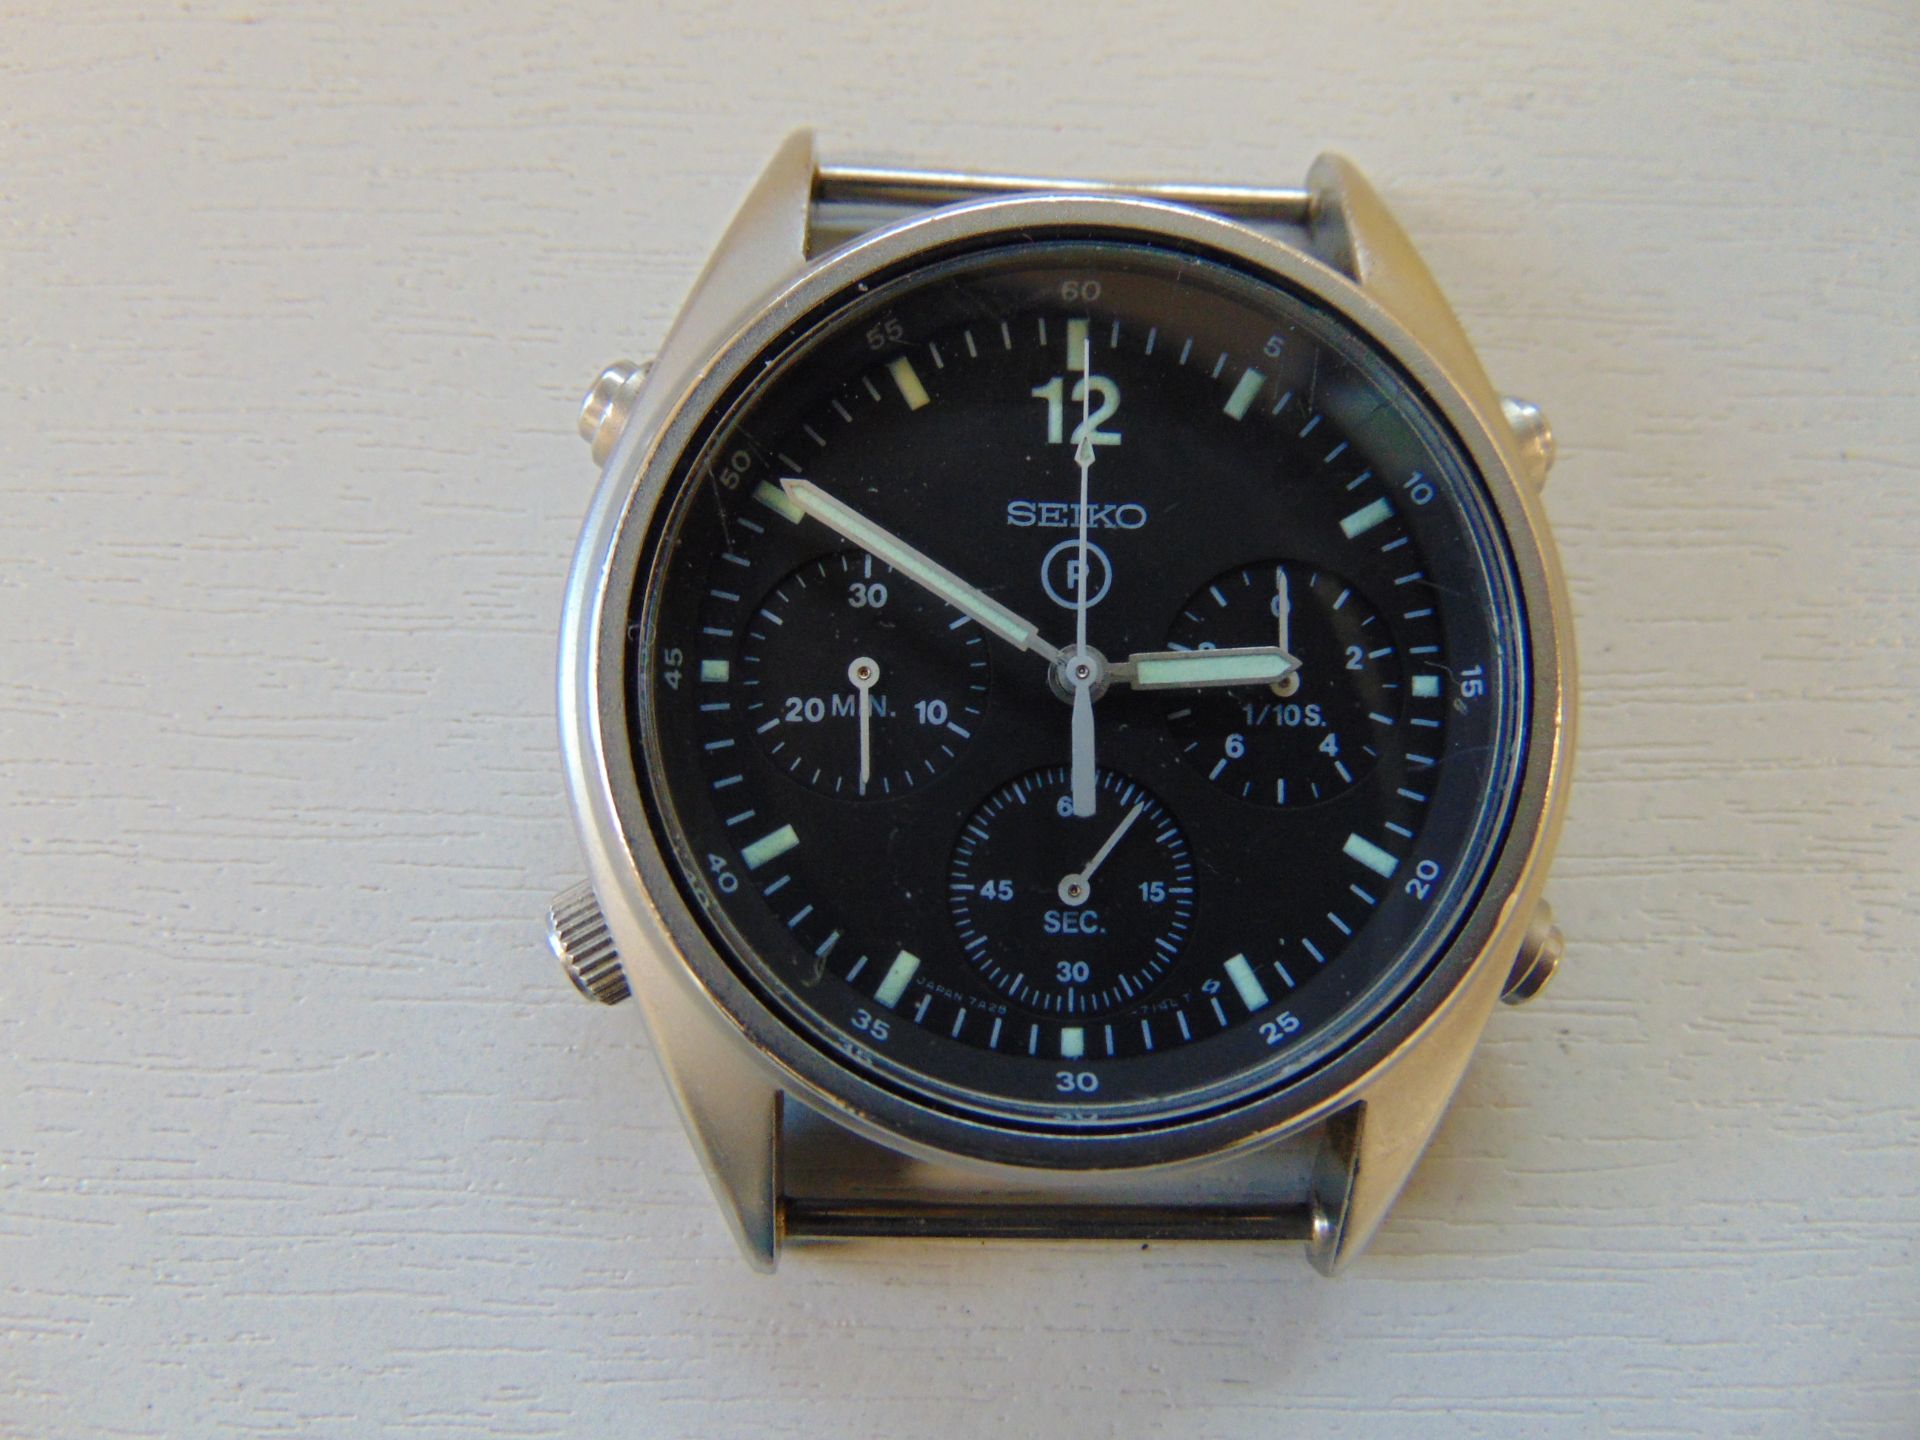 Rare Seiko Generation 1 Aircrew Chrono RAF Harrier Force Issue Nato Marks, Date 1988 - Image 4 of 6